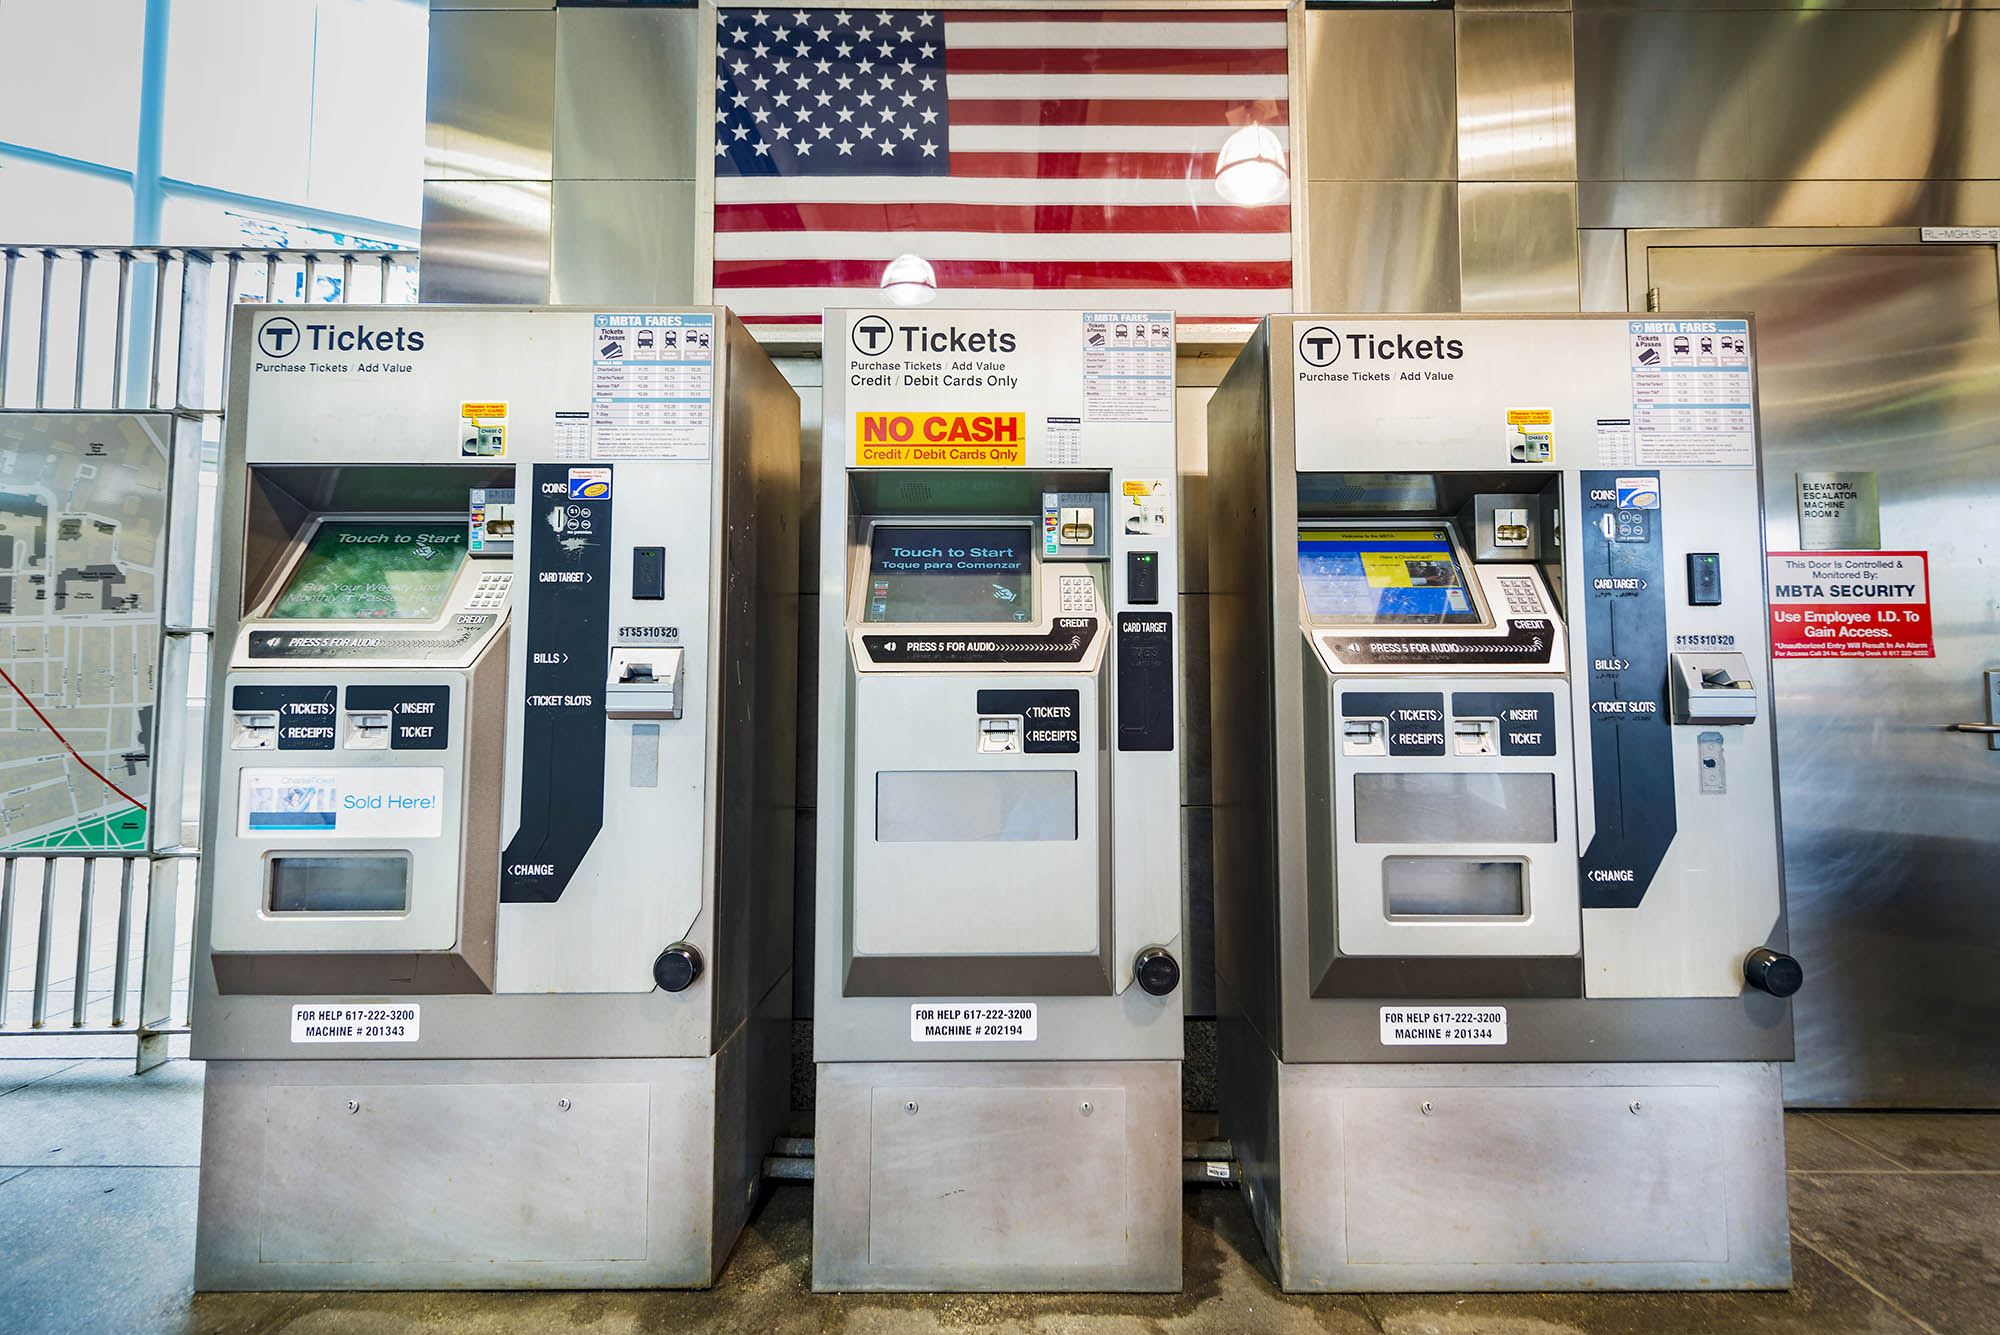 Photo: A row of Ticket Machines Located in Boston Subway. three metal machines for ticketing are shown. The machine in the middle features a yellow sign that reads "no cash".